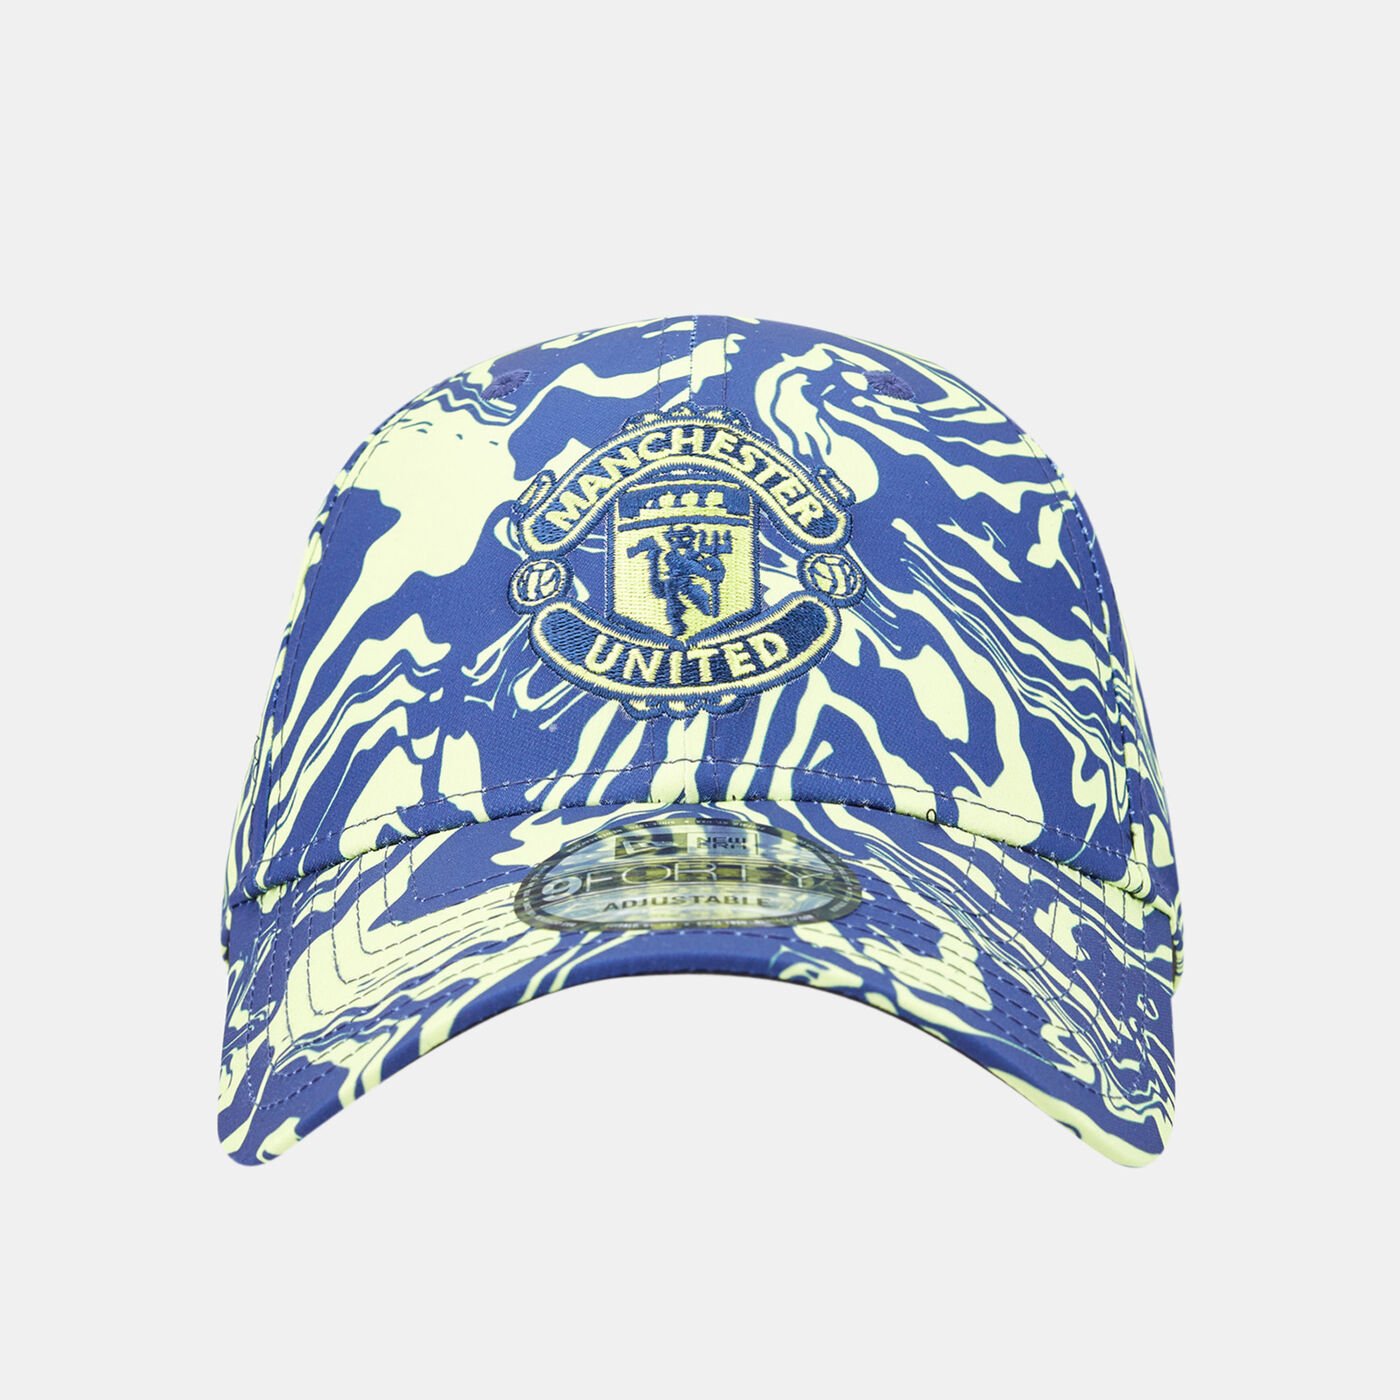 Men's Printed Manchester United Football Club 9FORTY Cap